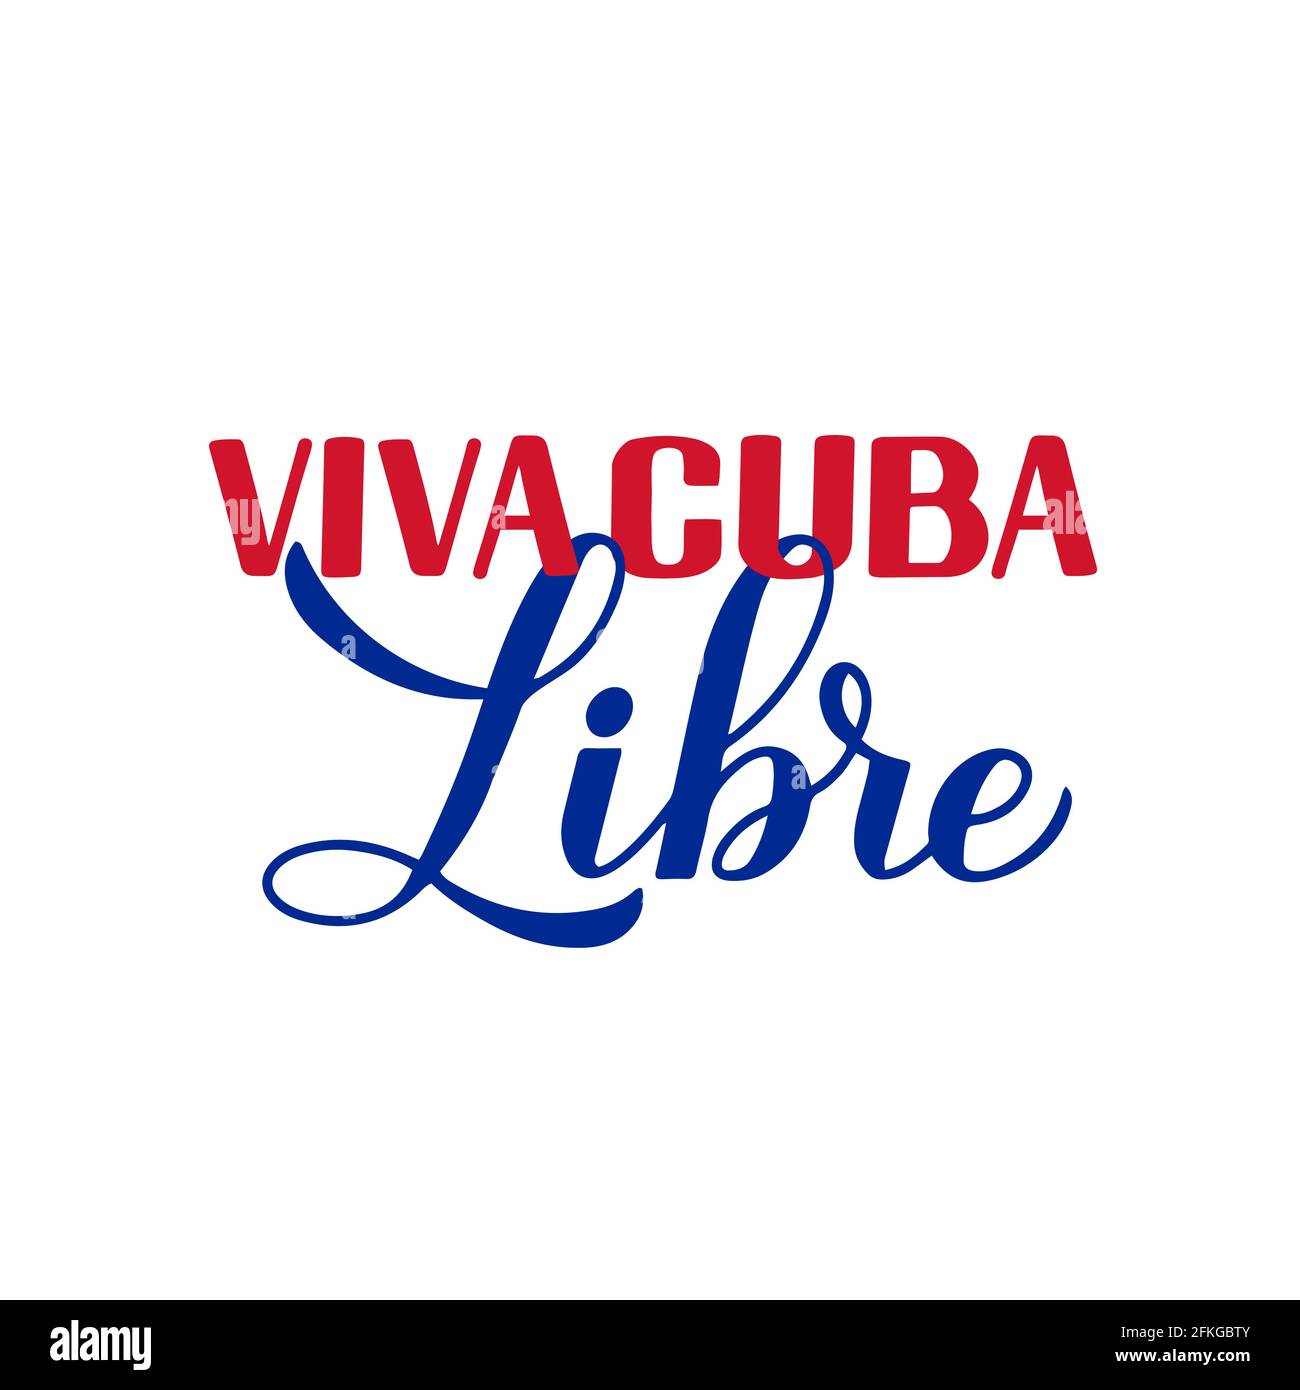 Download Viva Cuba Libre High Resolution Stock Photography And Images Alamy